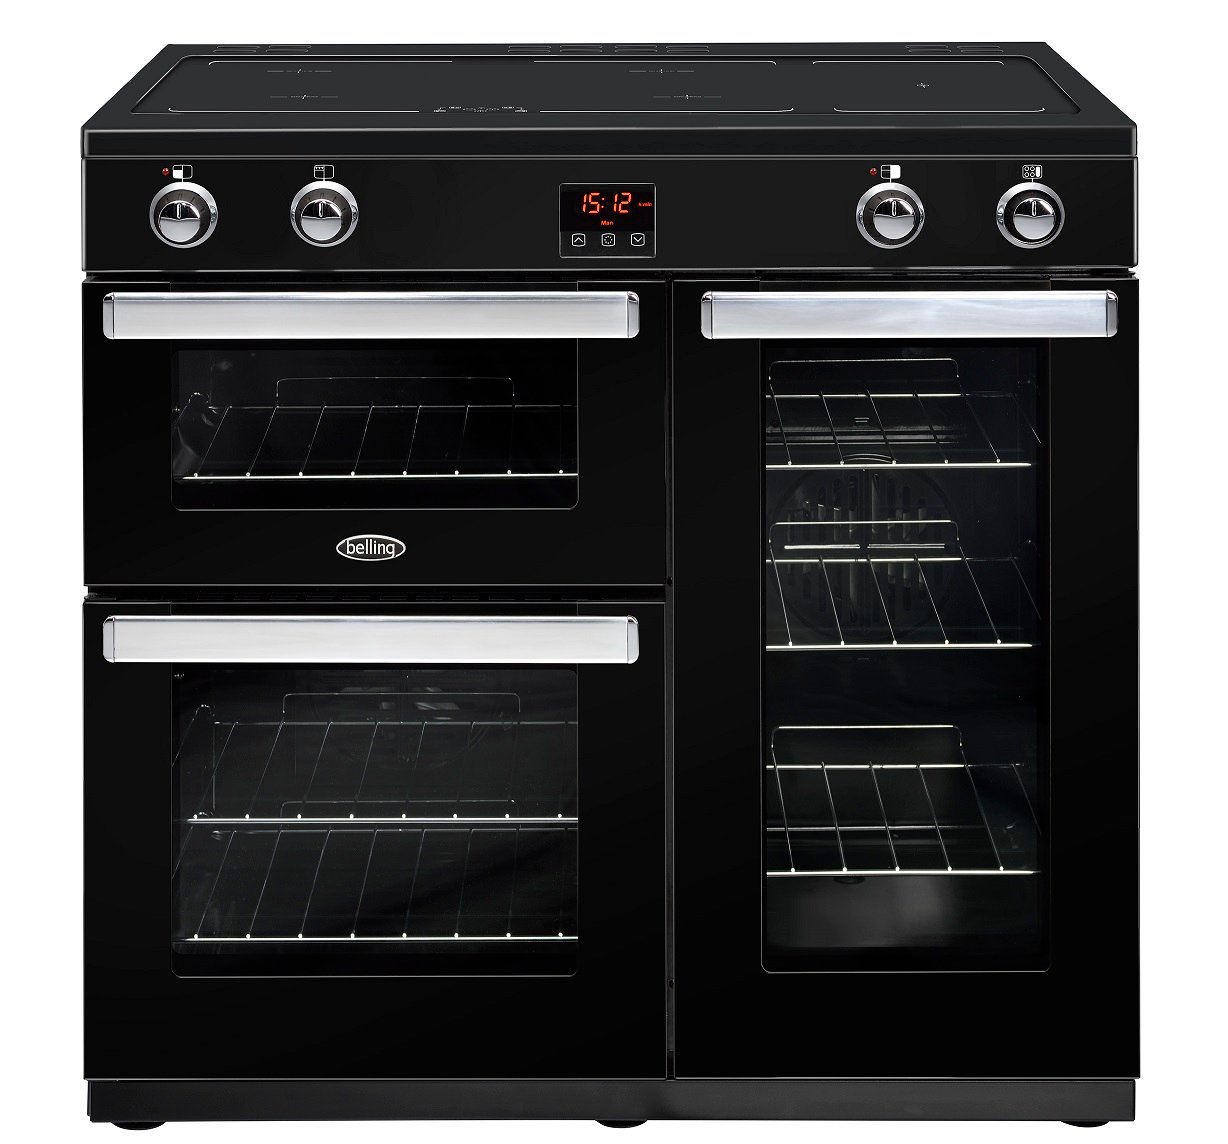 90cm electric range cooker with induction, Maxi-Clock, market leading tall oven and easy clean enamel. Requires 32A connection.